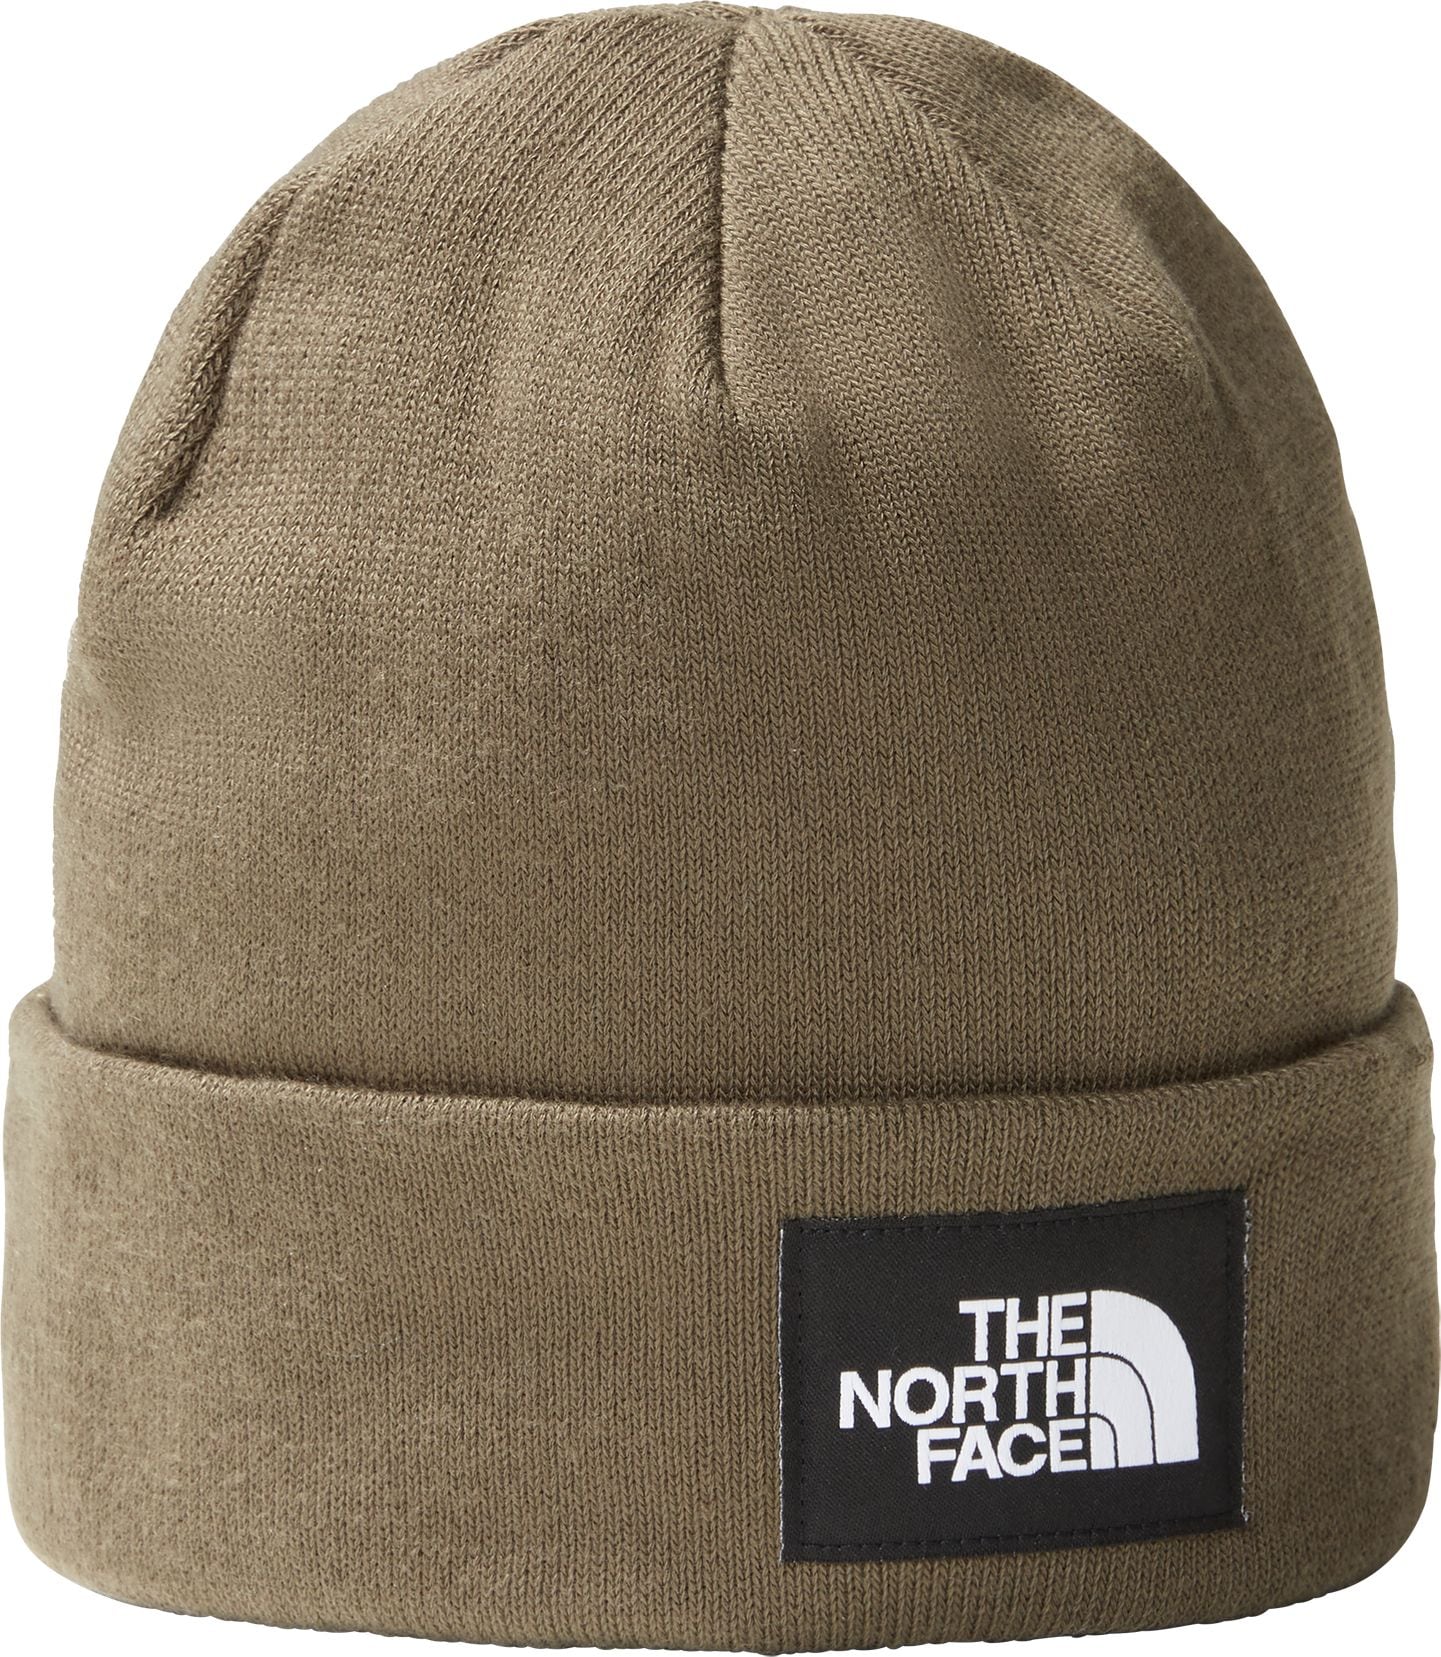 THE NORTH FACE, DOCKWORKERRECYCLEDBEANIE